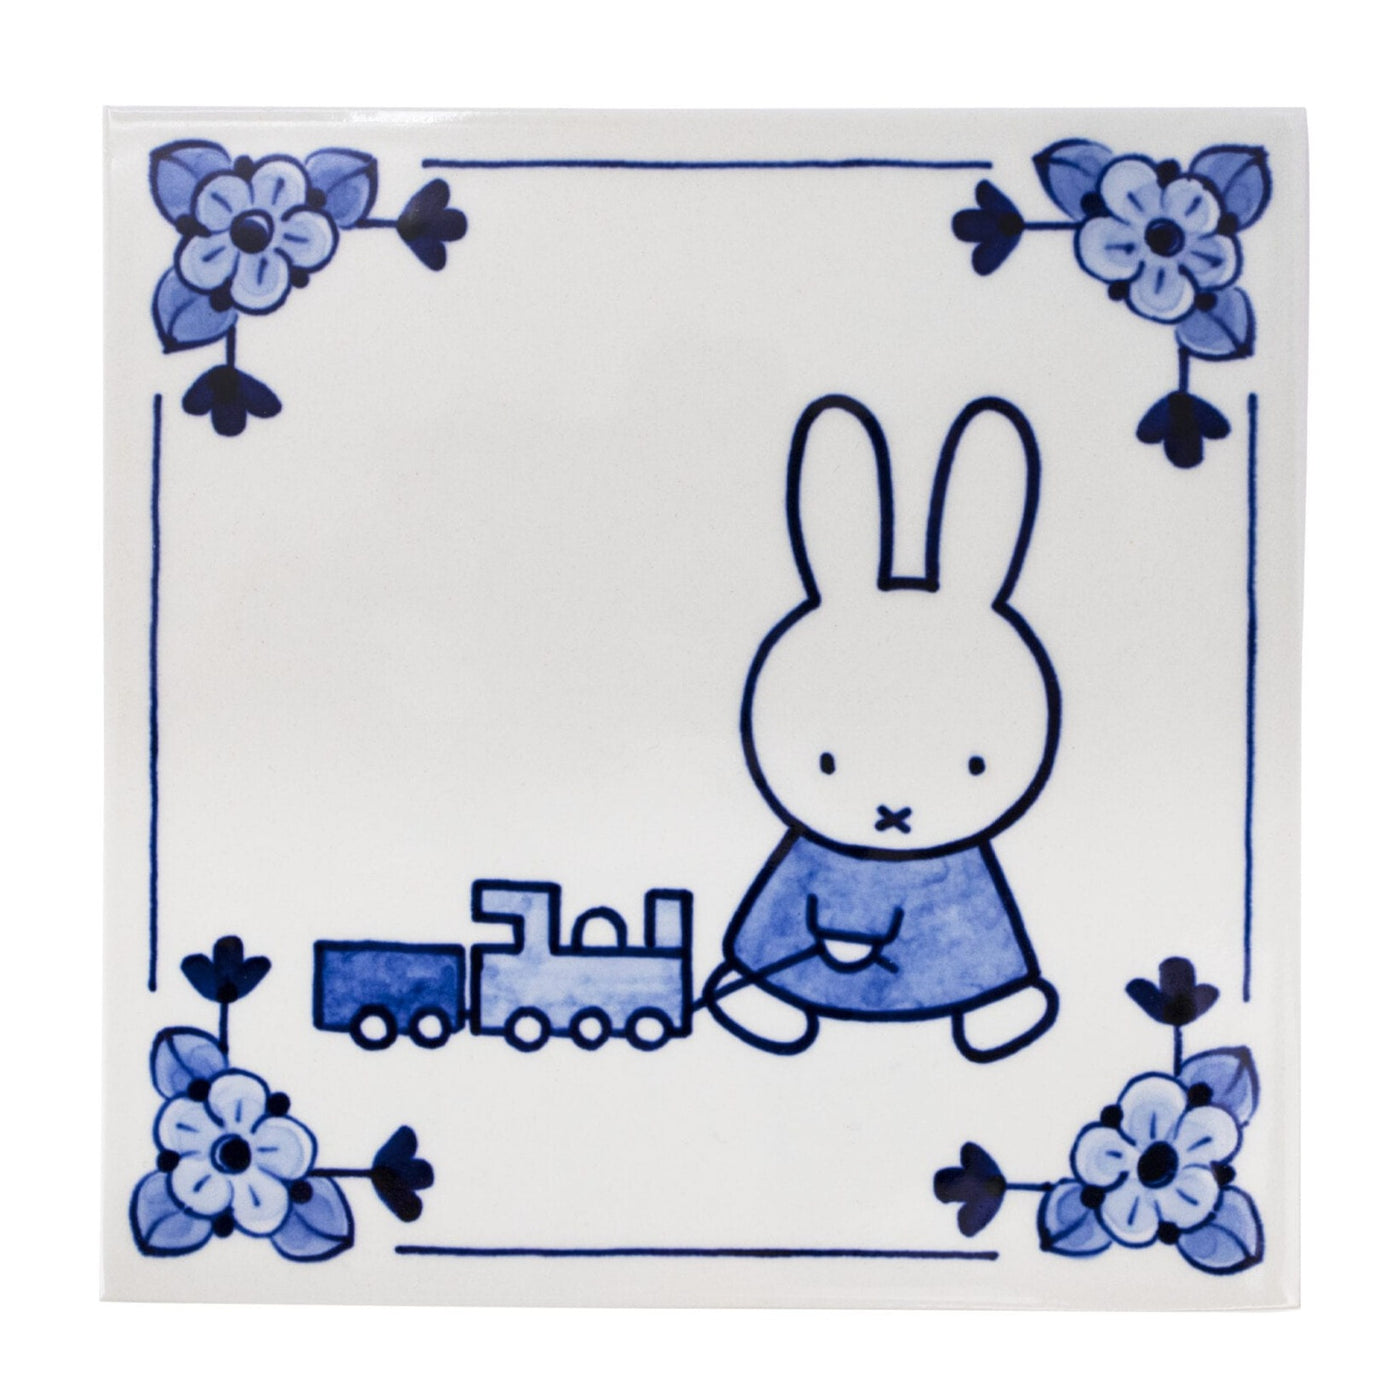 Tile Miffy Hand-Painted Delft Blue by Royal Delft